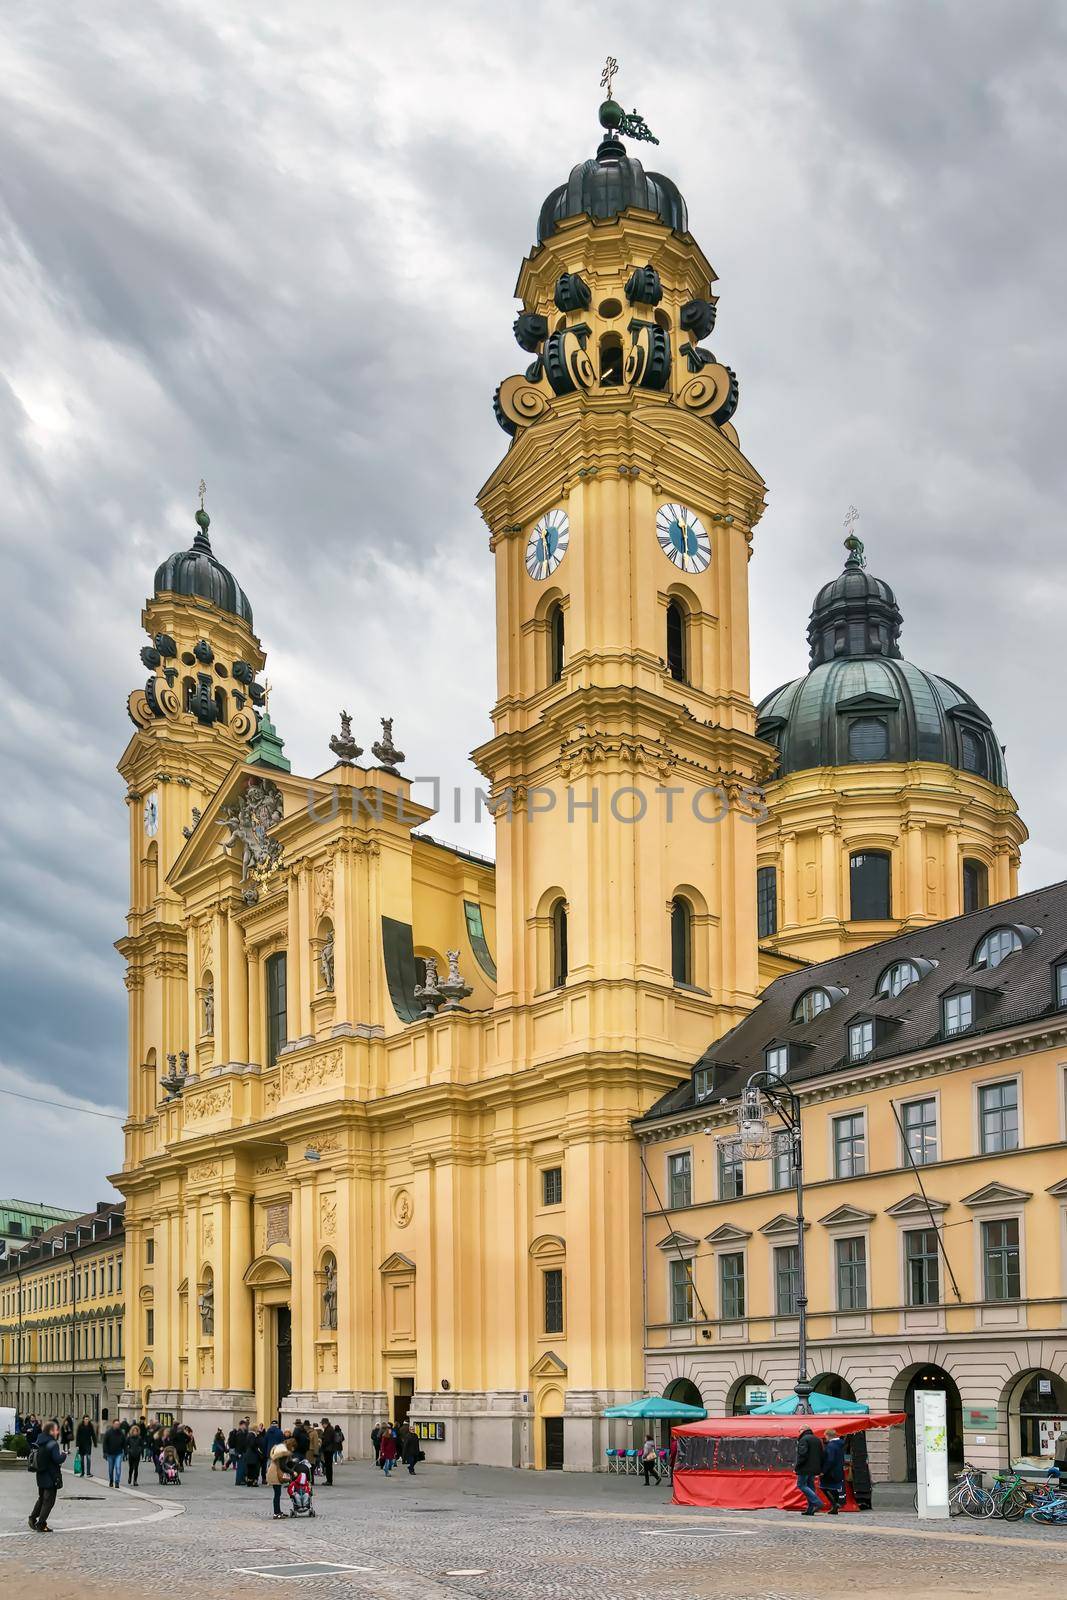  Theatine Church of St. Cajetan is a Catholic church in Munich, Germany. Built from 1663 to 1690